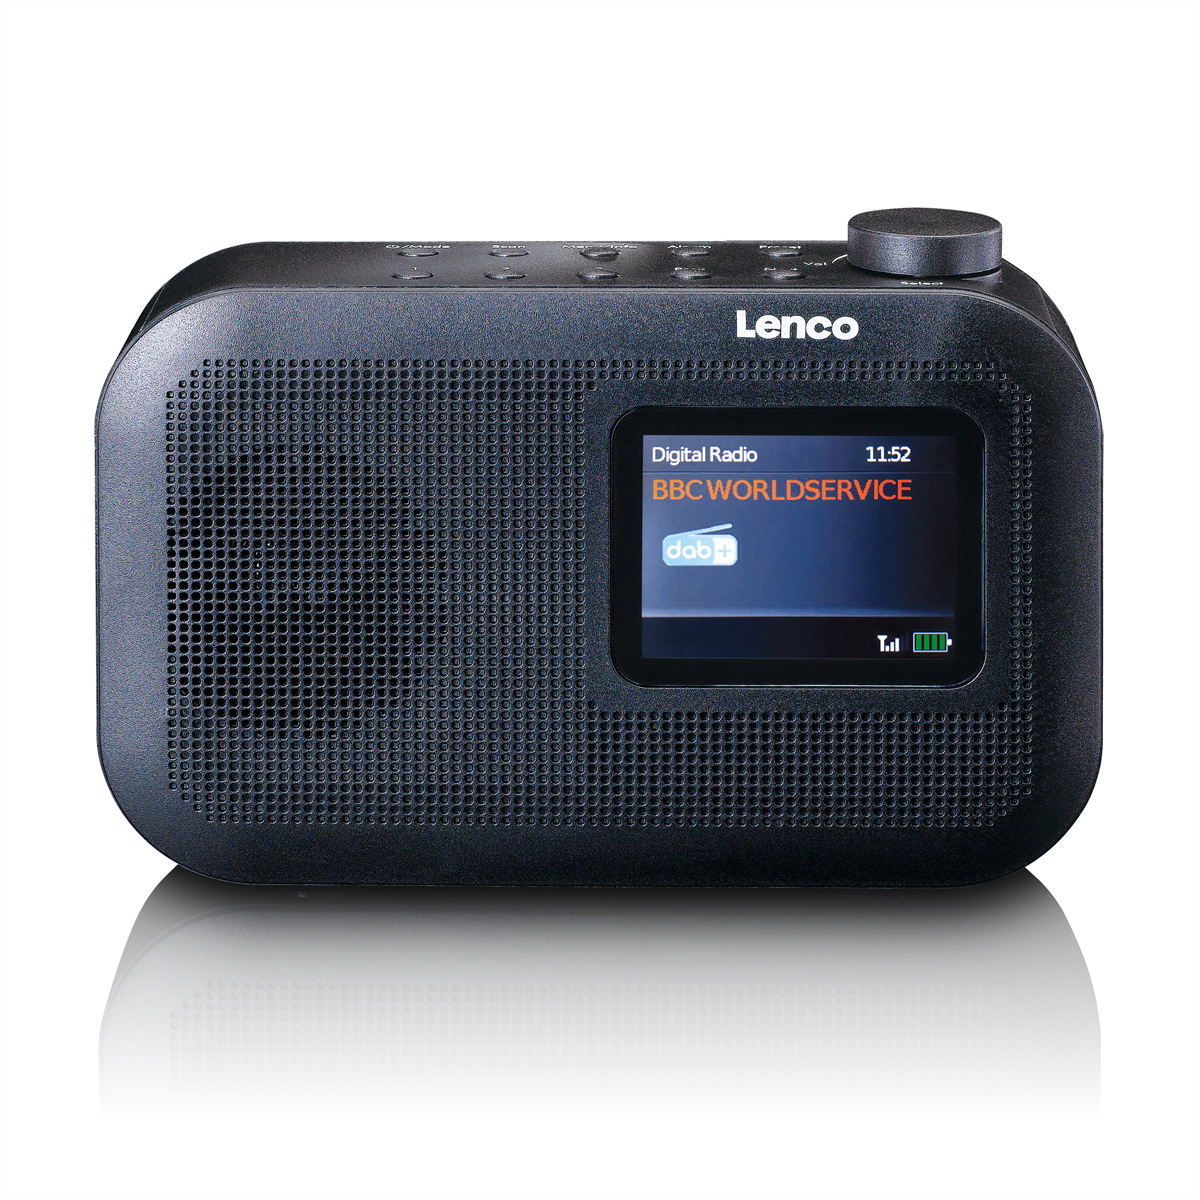 Top Internet/DAB+ Radios - Best Selection & Quality